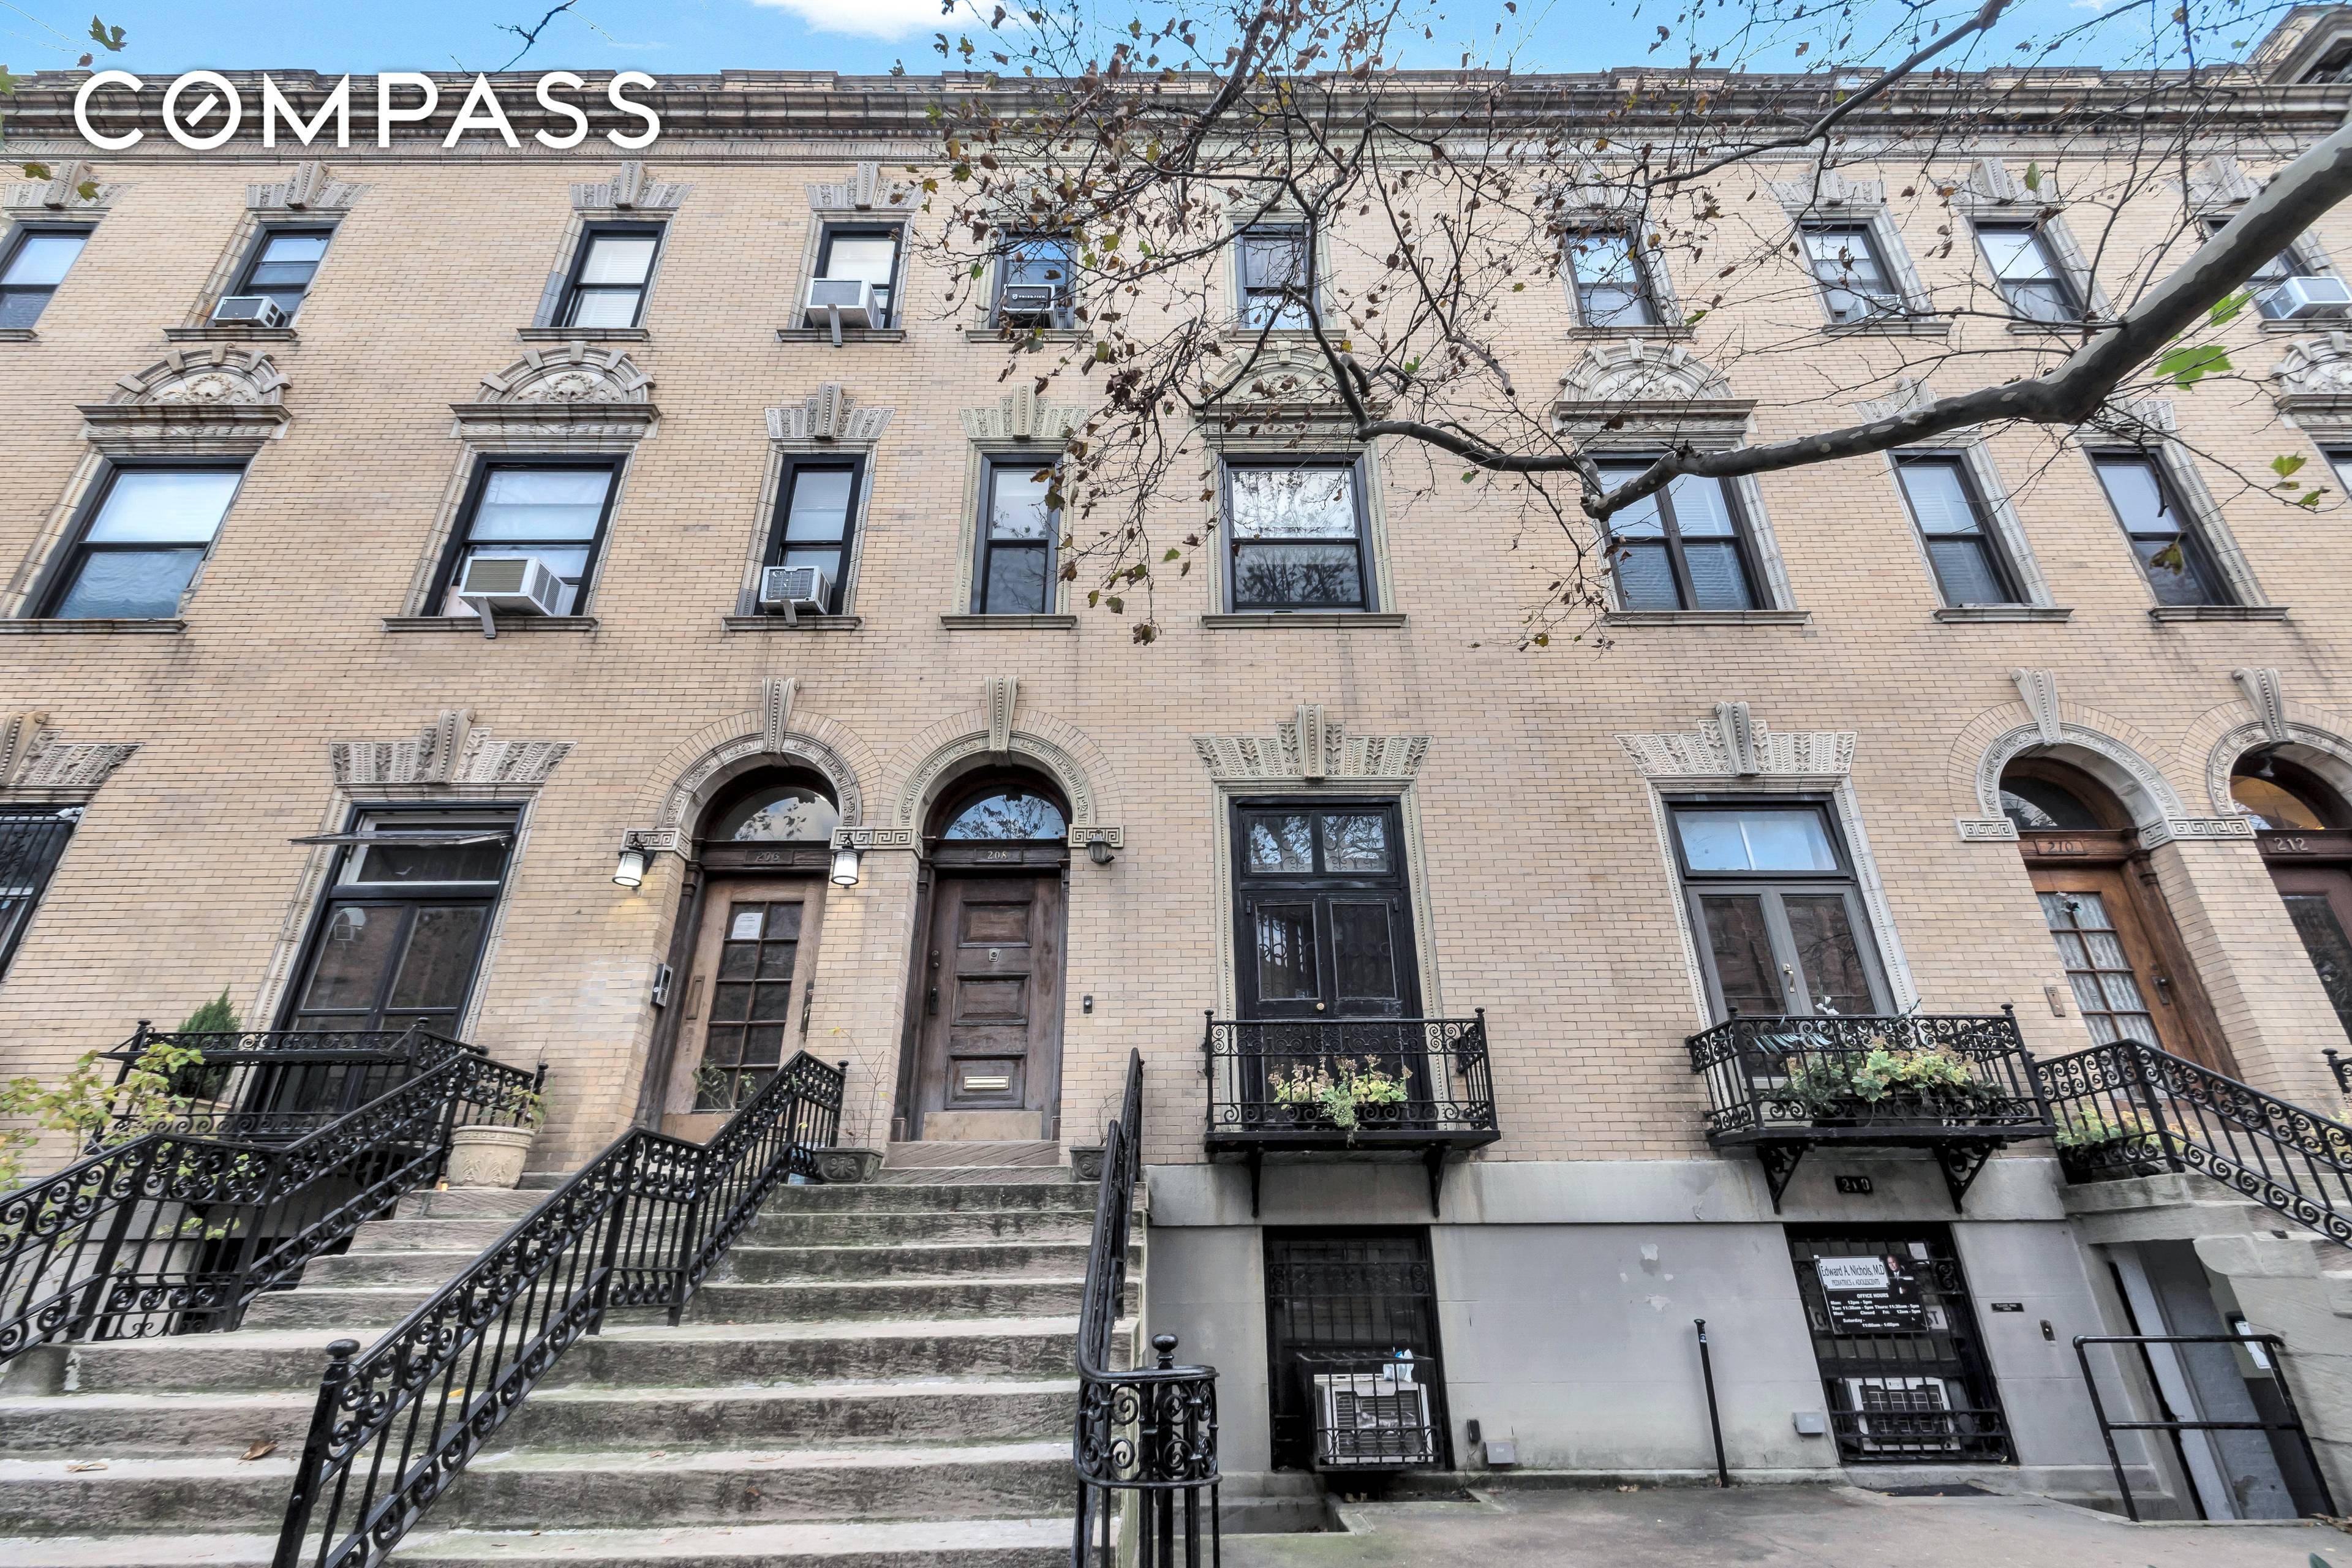 Great opportunity to own a single family home on of the most sort after locations in HARLEM.